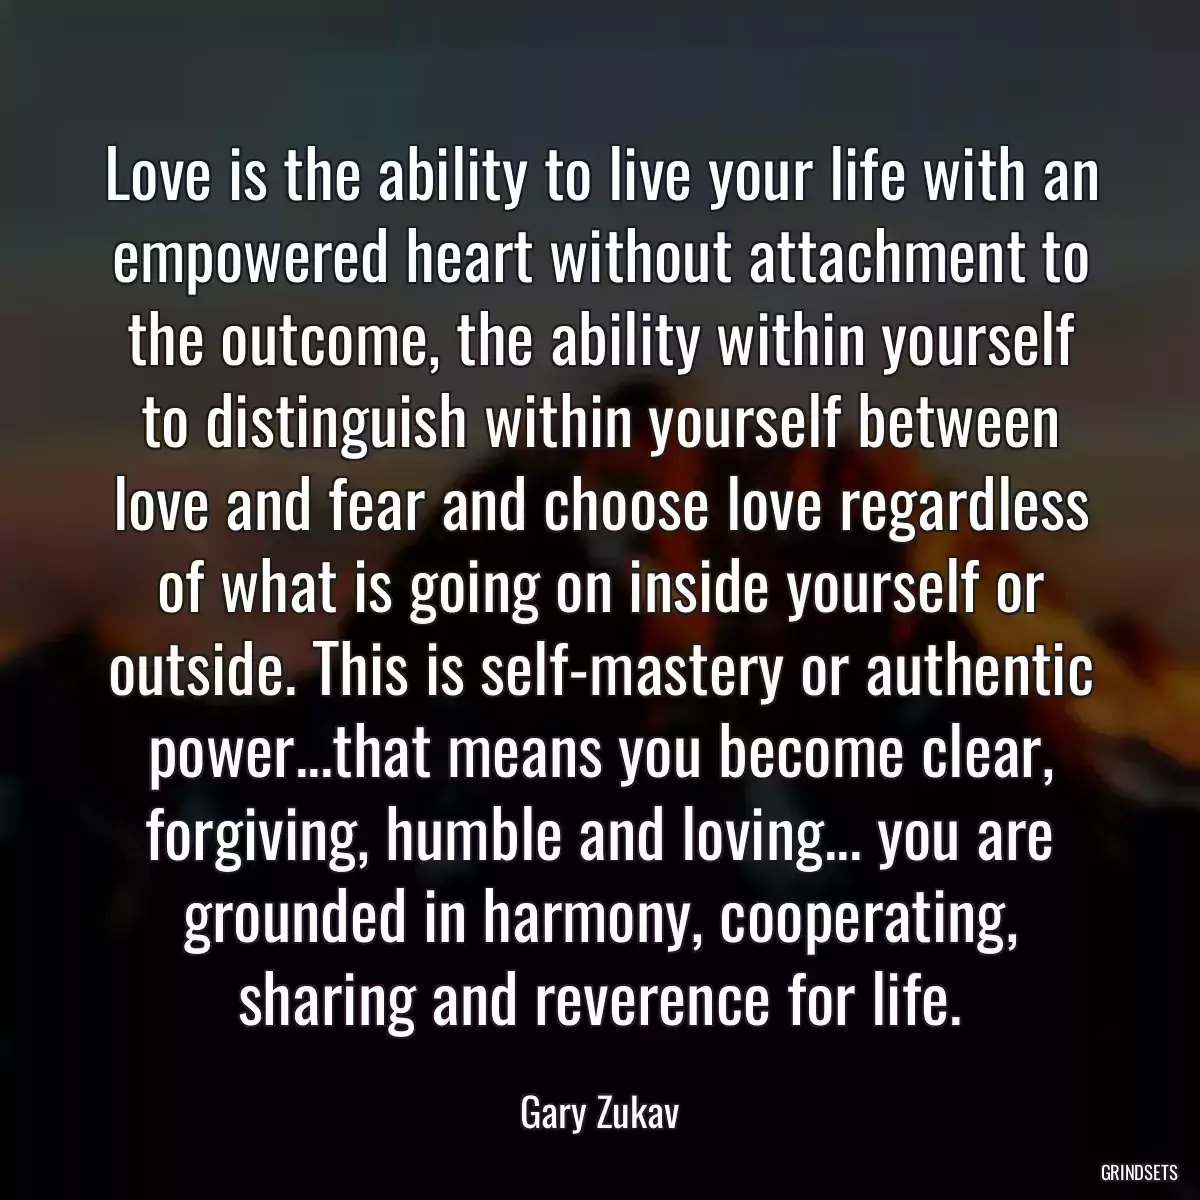 Love is the ability to live your life with an empowered heart without attachment to the outcome, the ability within yourself to distinguish within yourself between love and fear and choose love regardless of what is going on inside yourself or outside. This is self-mastery or authentic power...that means you become clear, forgiving, humble and loving... you are grounded in harmony, cooperating, sharing and reverence for life.